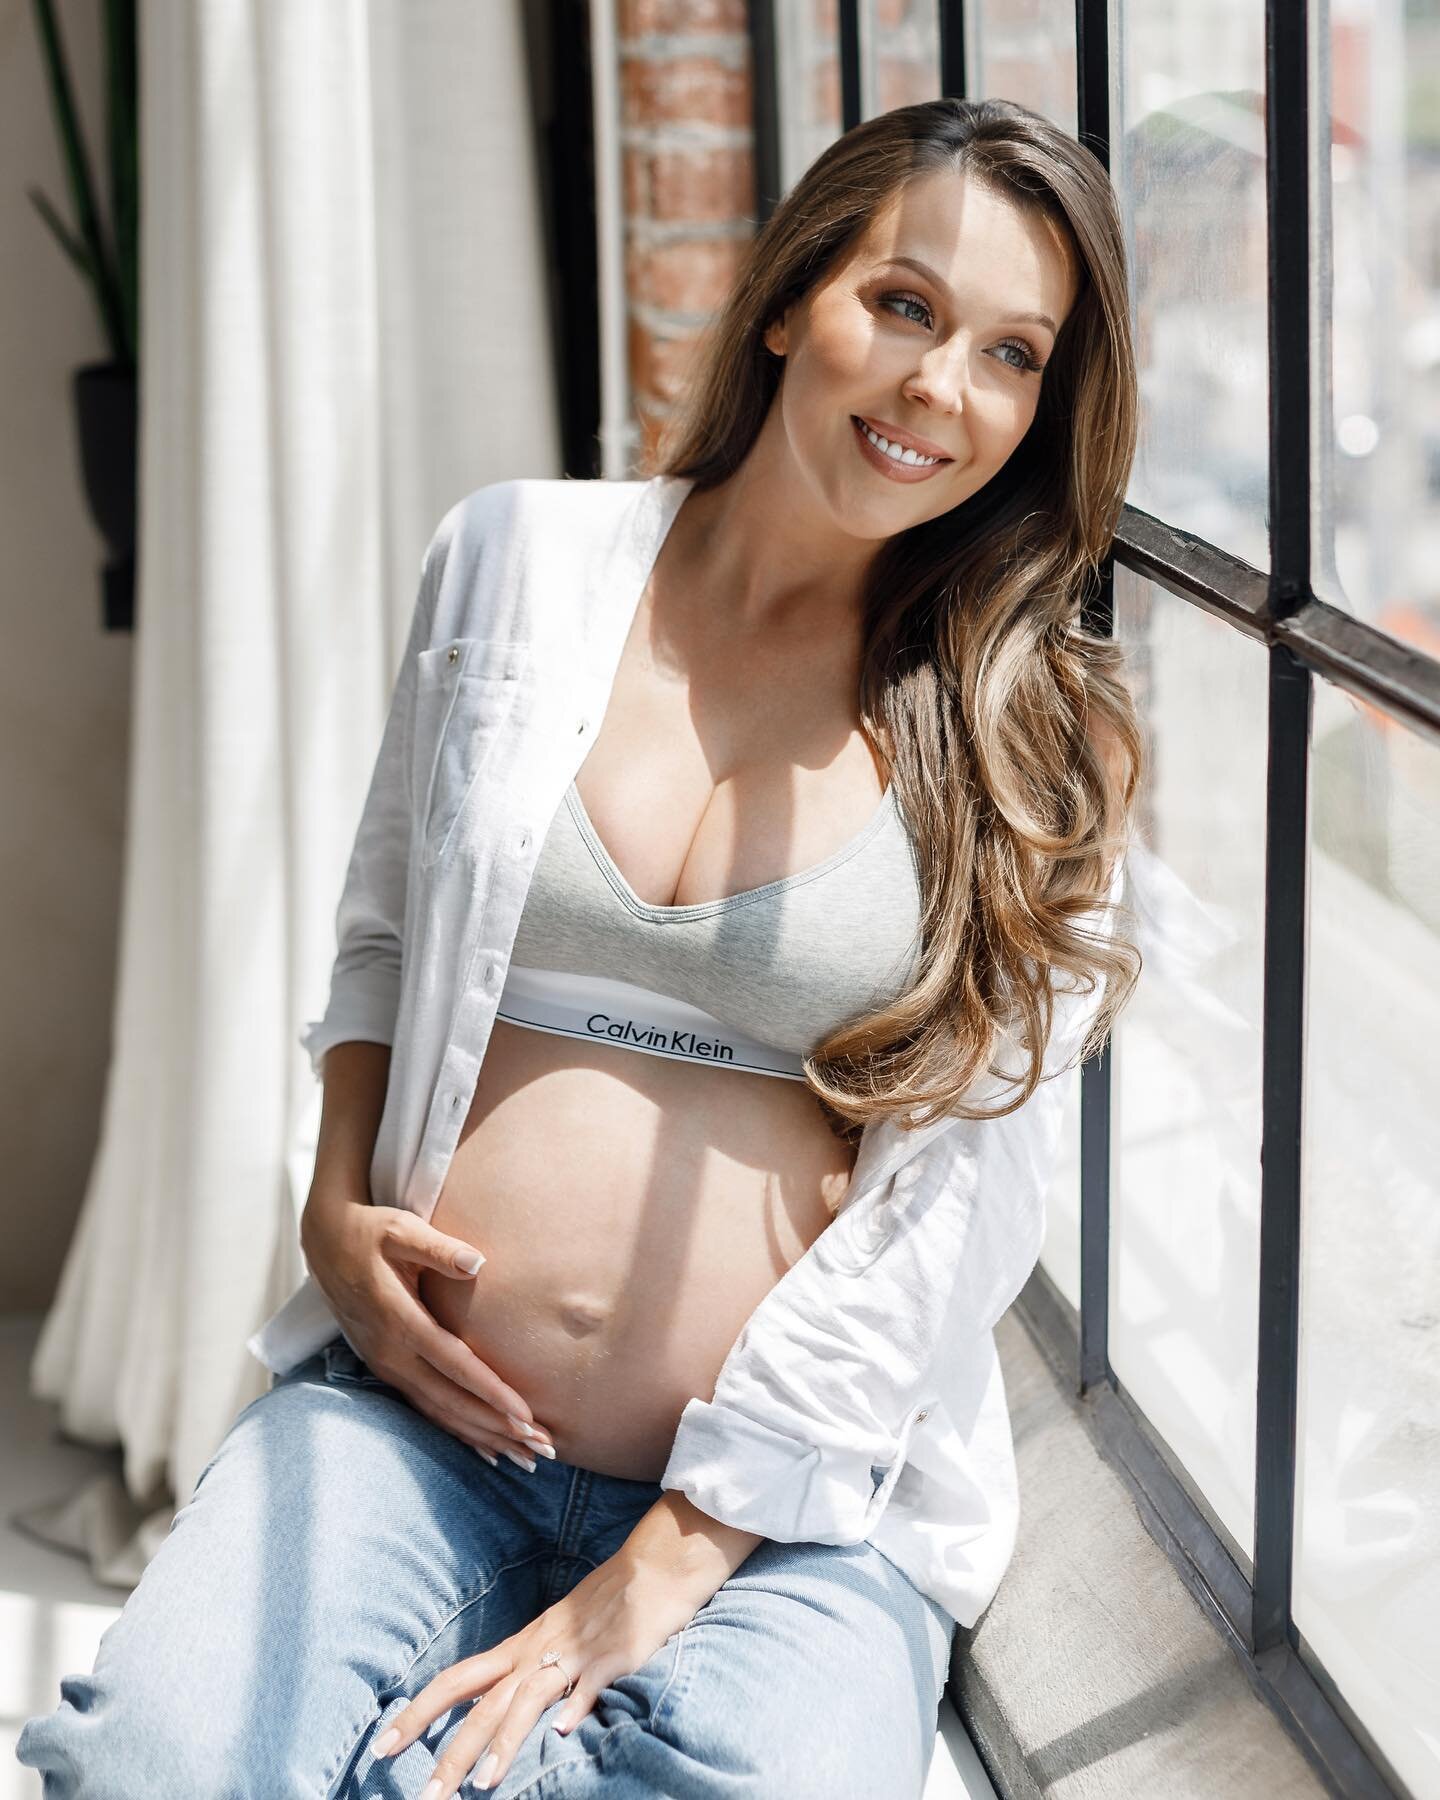 From bump to baby bliss, this incredible journey has filled our hearts with love and anticipation. Capturing the beauty of motherhood and the miracle of life in these precious moments. 

I am so lucky to have so many wonderful clients who have seen m